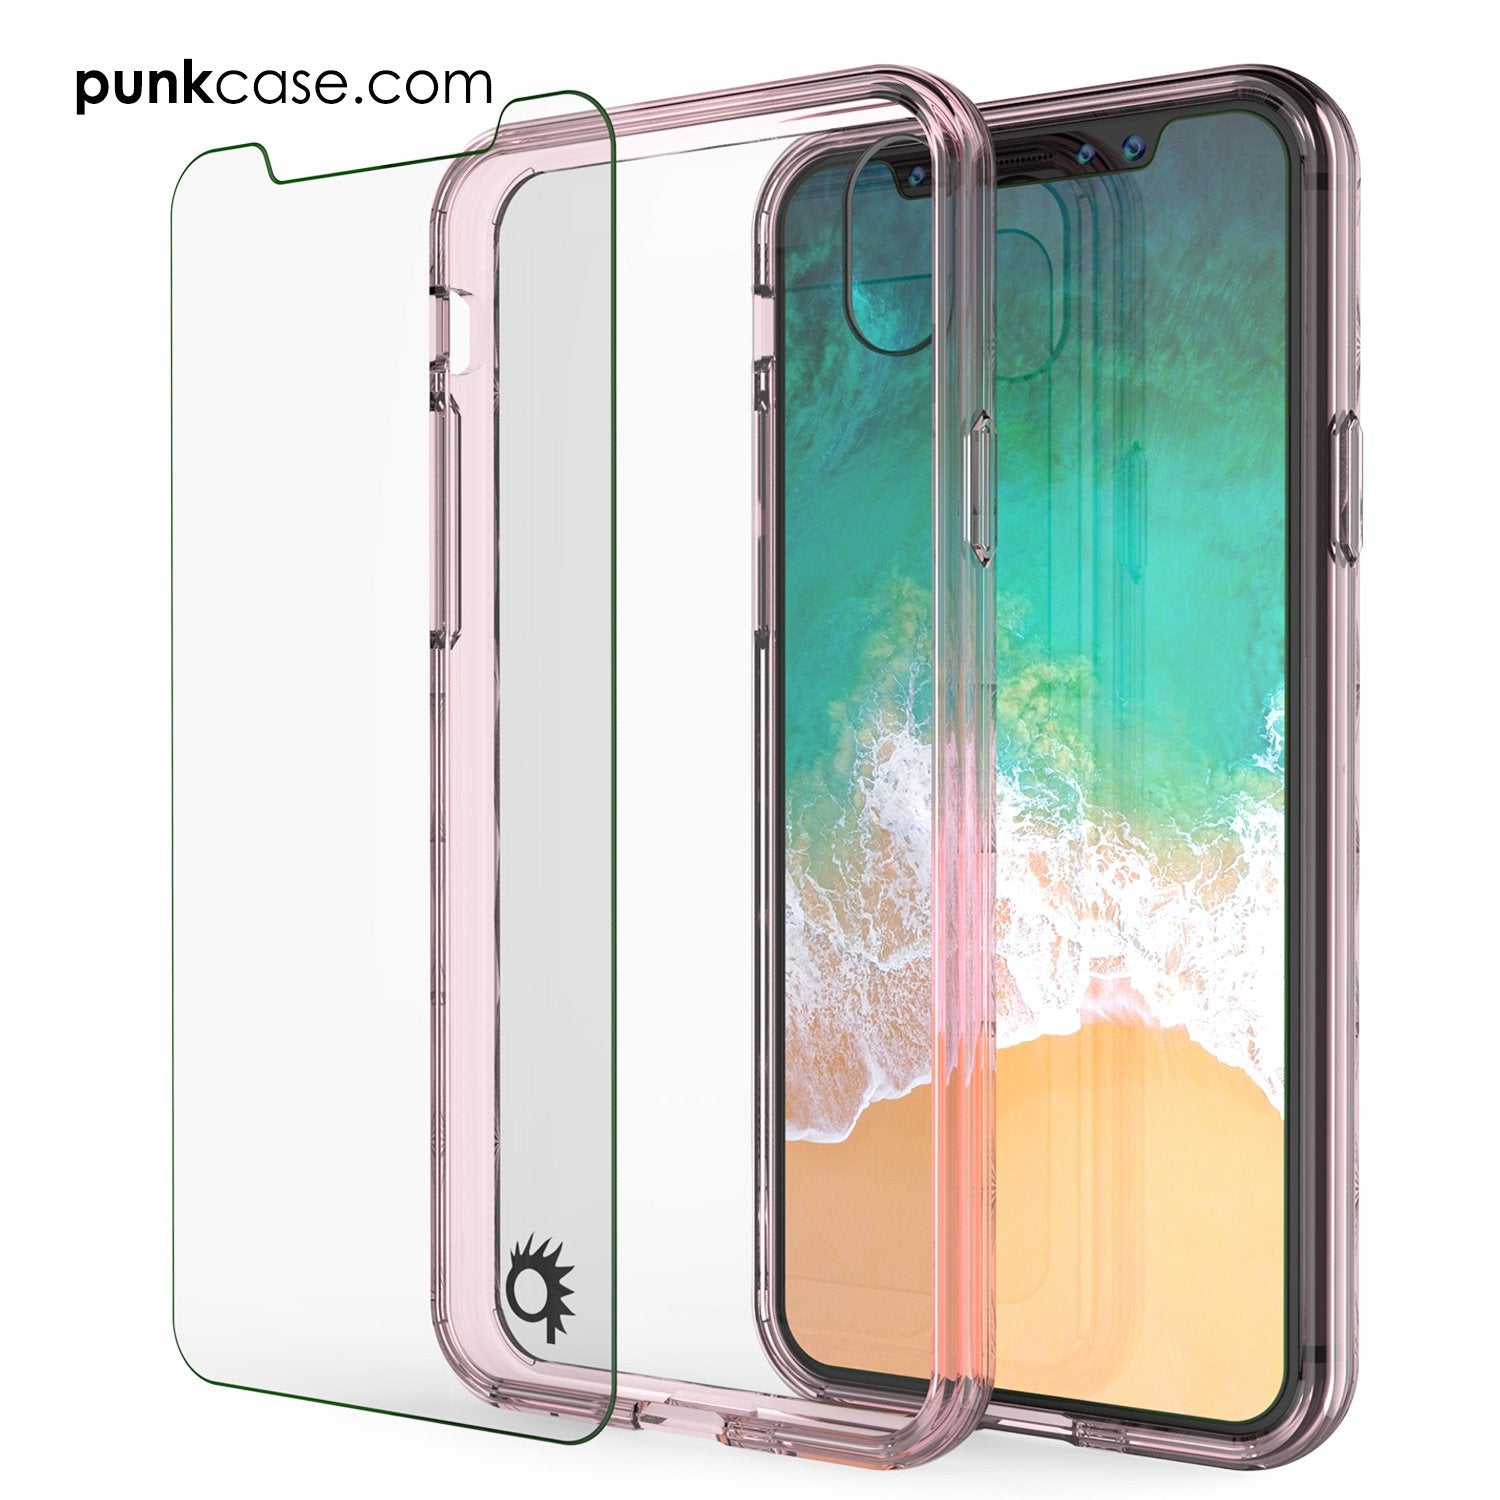 iPhone X Case, PUNKcase [LUCID 2.0 Series] [Slim Fit] Armor Cover W/Integrated Anti-Shock System [Crystal Pink] - PunkCase NZ